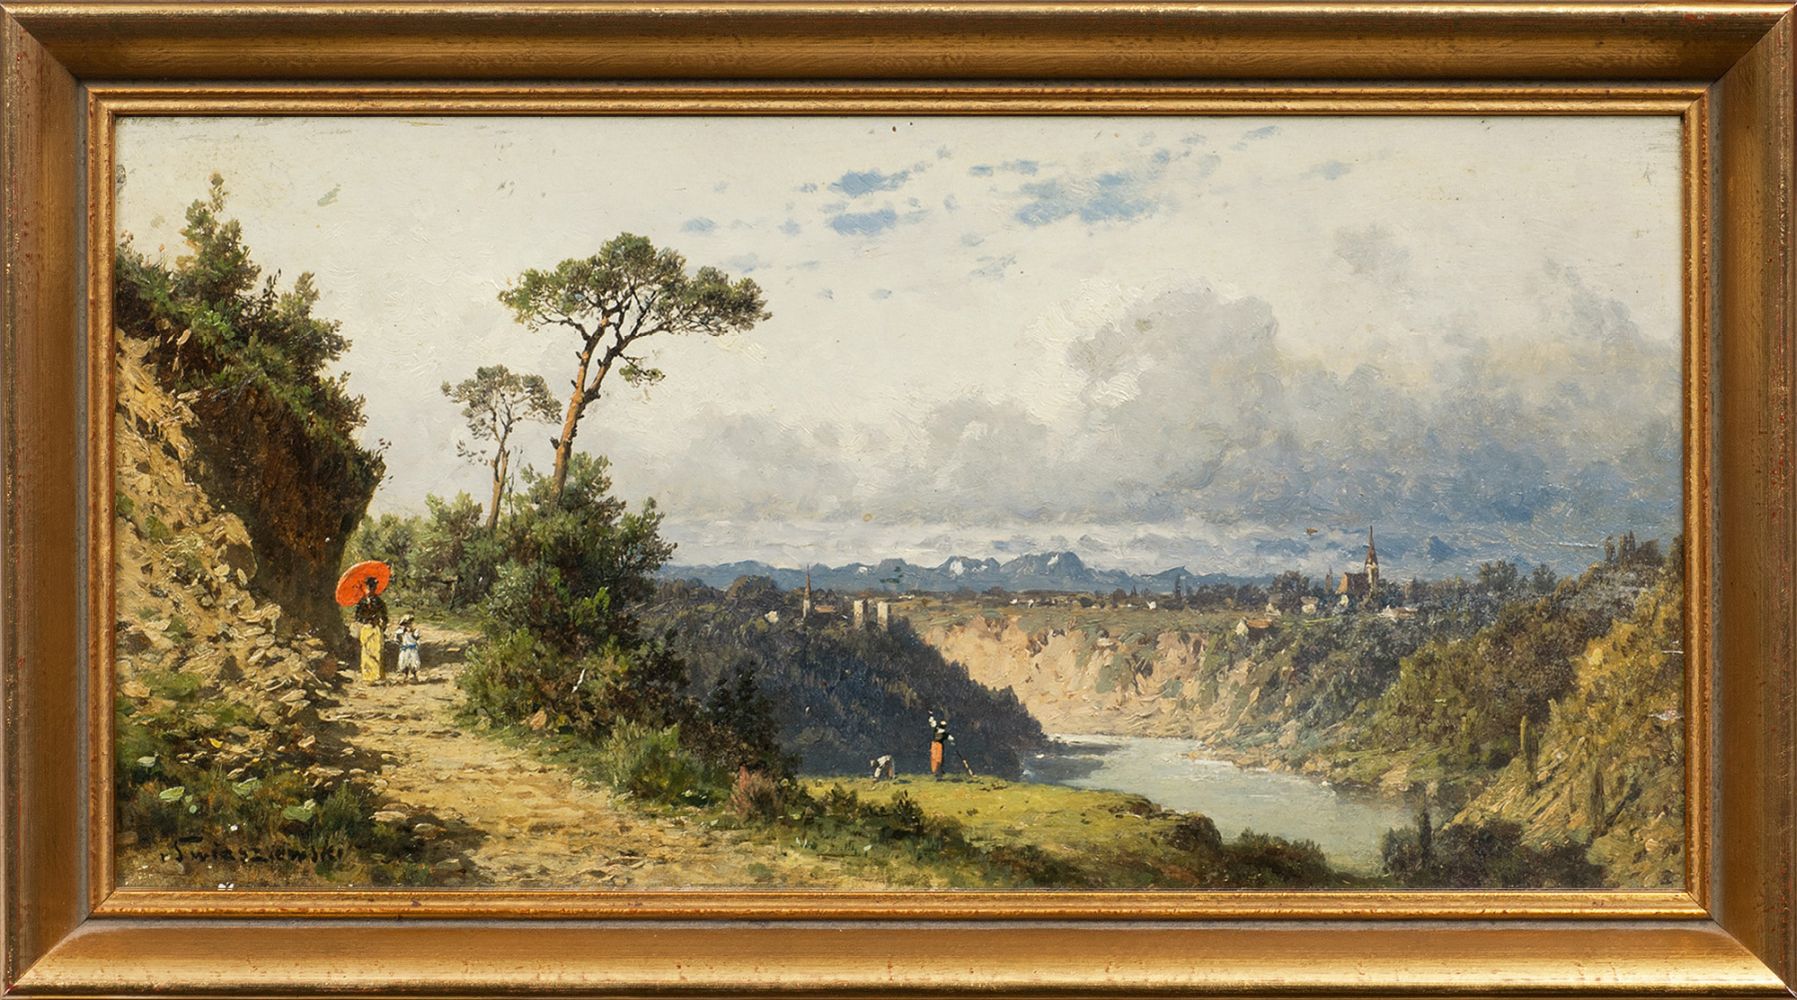 Promenade by a River Valley - image 2